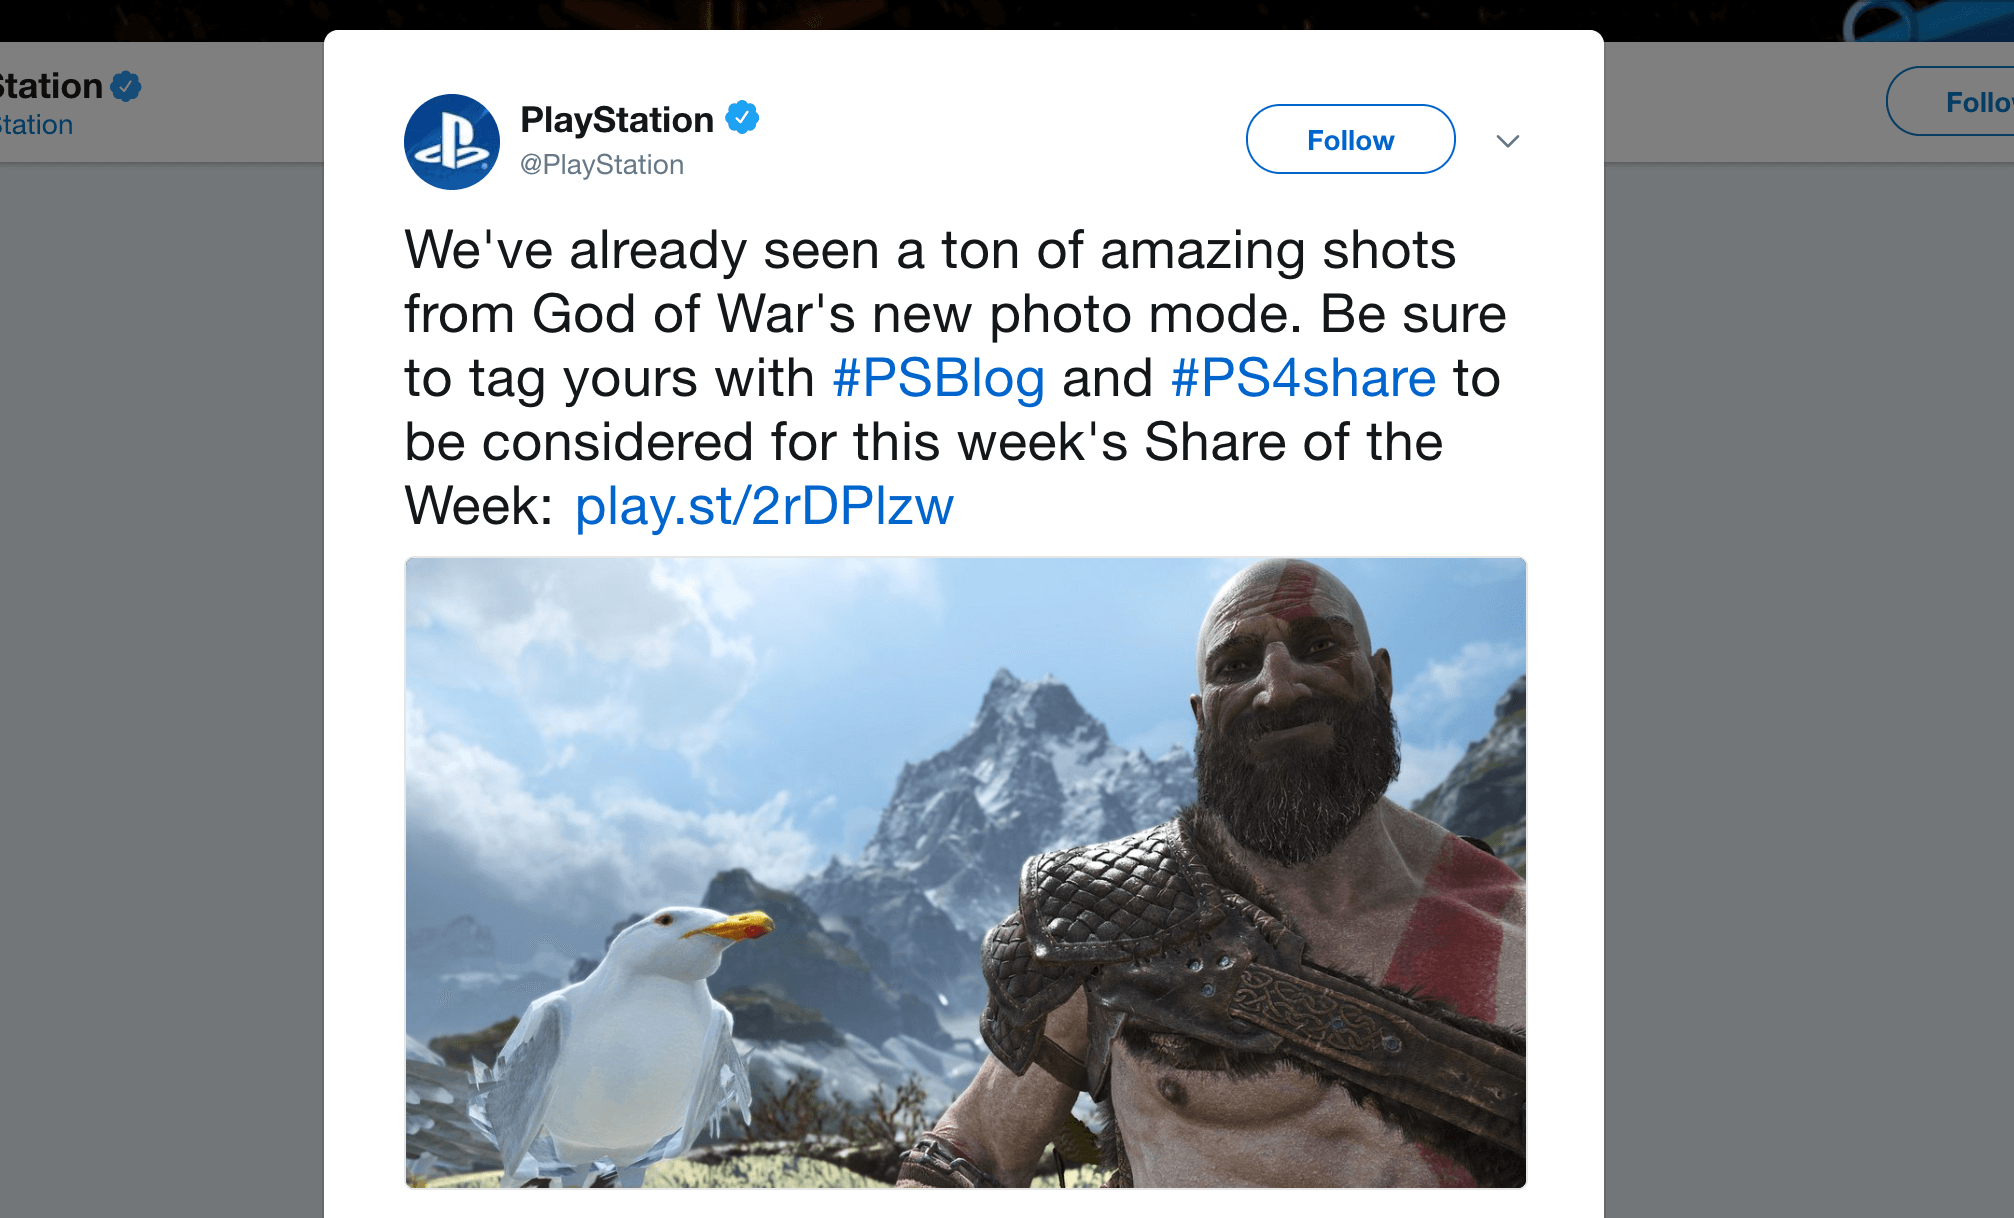 A tweet from the official PlayStation account, featuring a unique branded link.